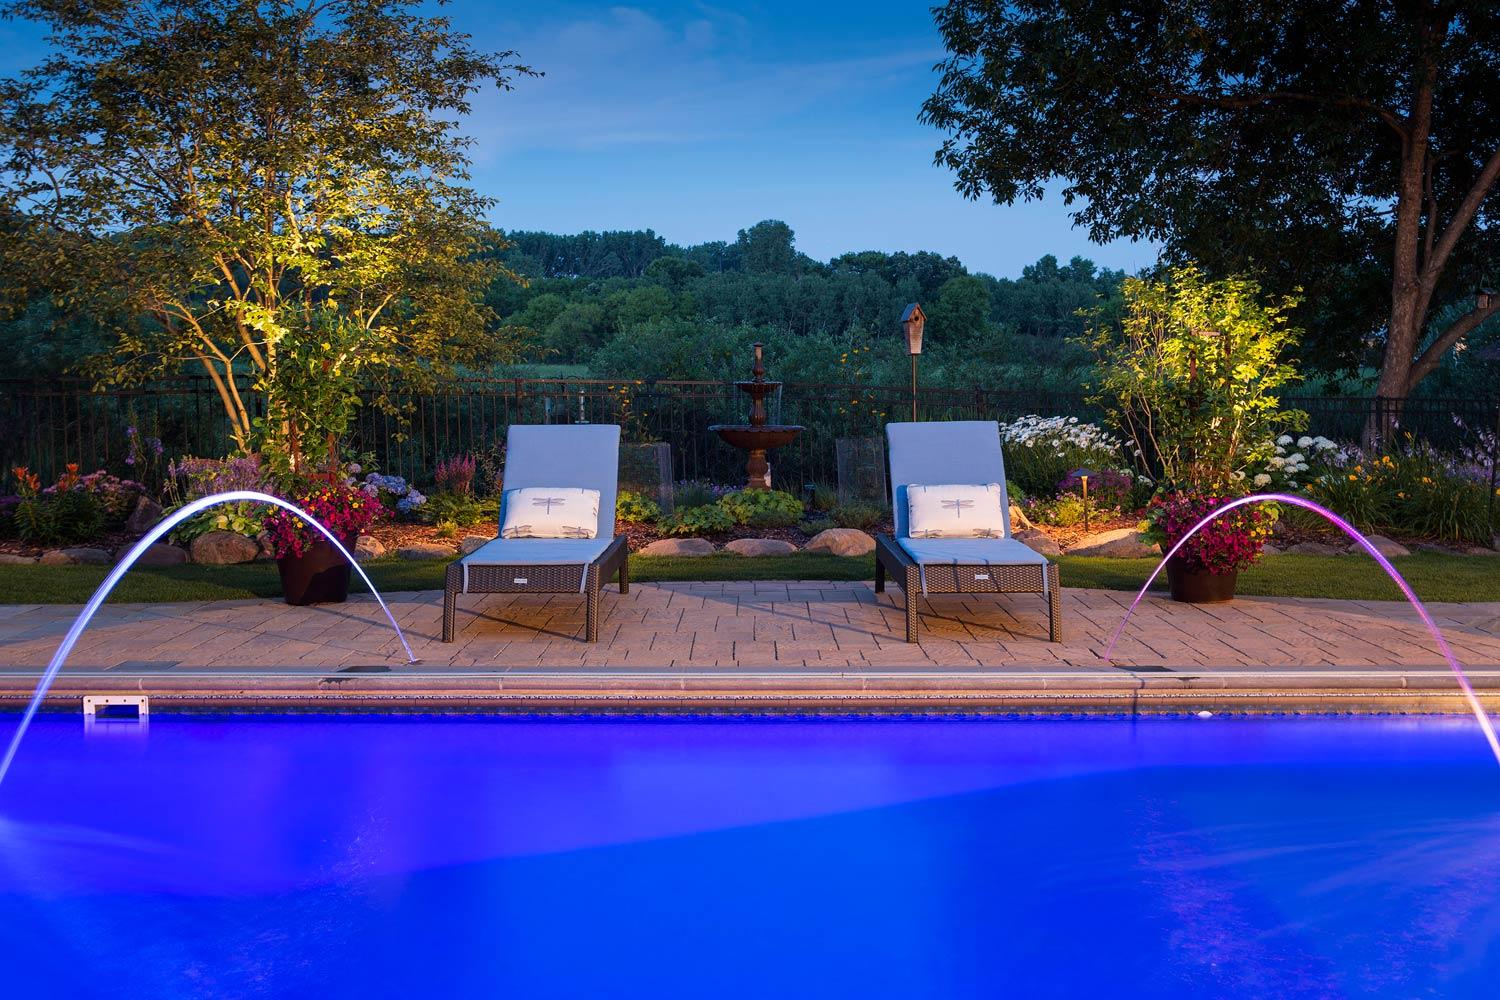 Backyard swimming pool with laminar jets and LED lighting